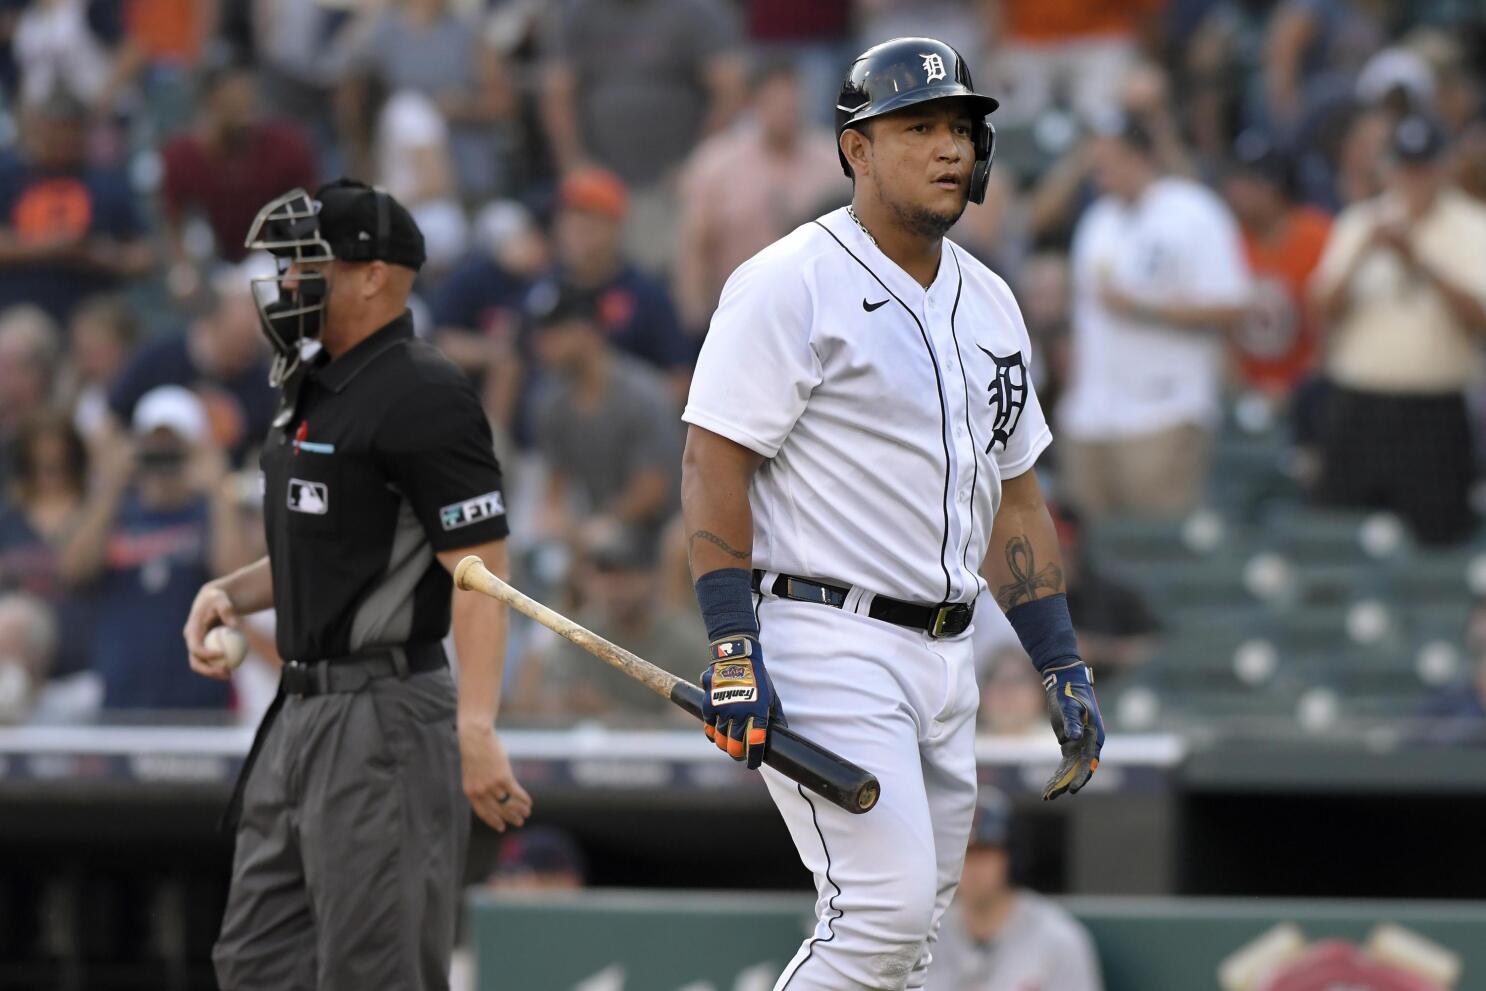 Tigers fall 6-3 to the Red Sox on Opening Day, Cabrera singles run in